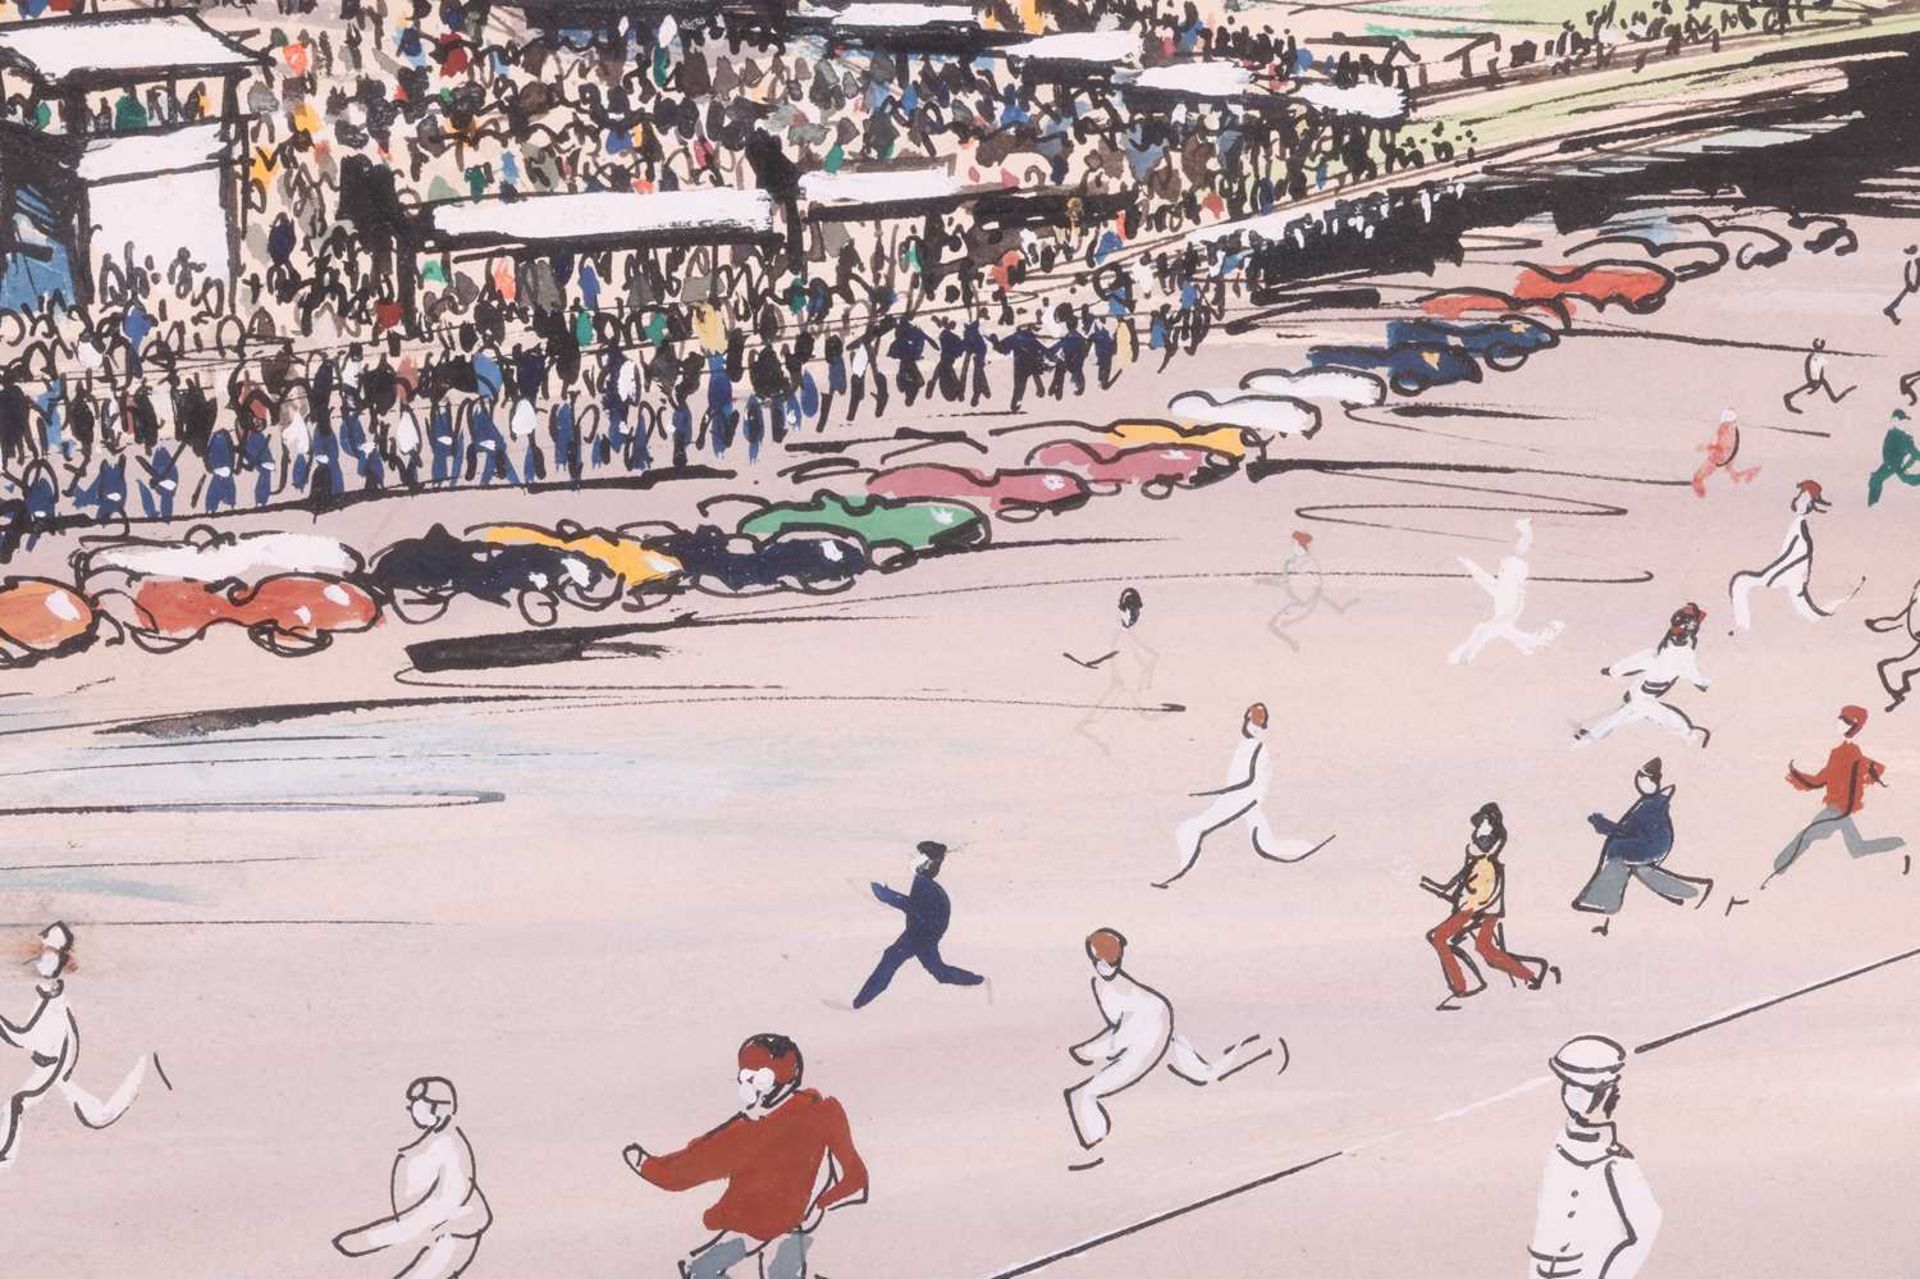 John Paddy Carstairs (1916 - 1970), 'Le Mans - The Start of the Race', signed 'John Paddy Carstairs' - Bild 8 aus 10